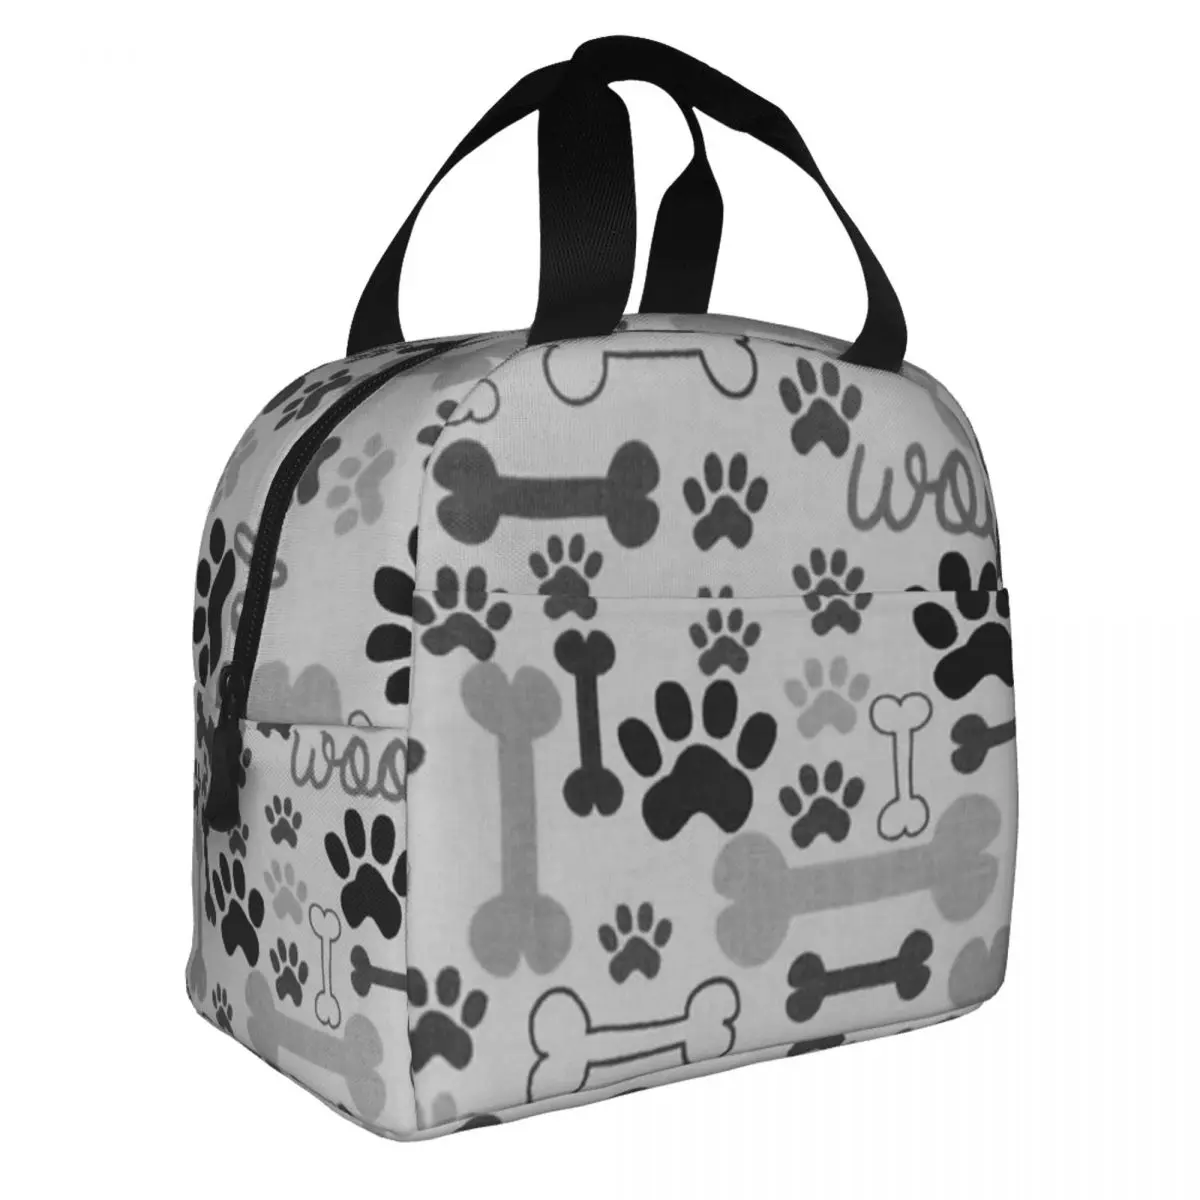 

Hot Sale Dog Bones And Paw Print Lunch Box Leakproof Cooler Thermal Food Insulated Lunch Bag For Women Work Picnic Bento Box